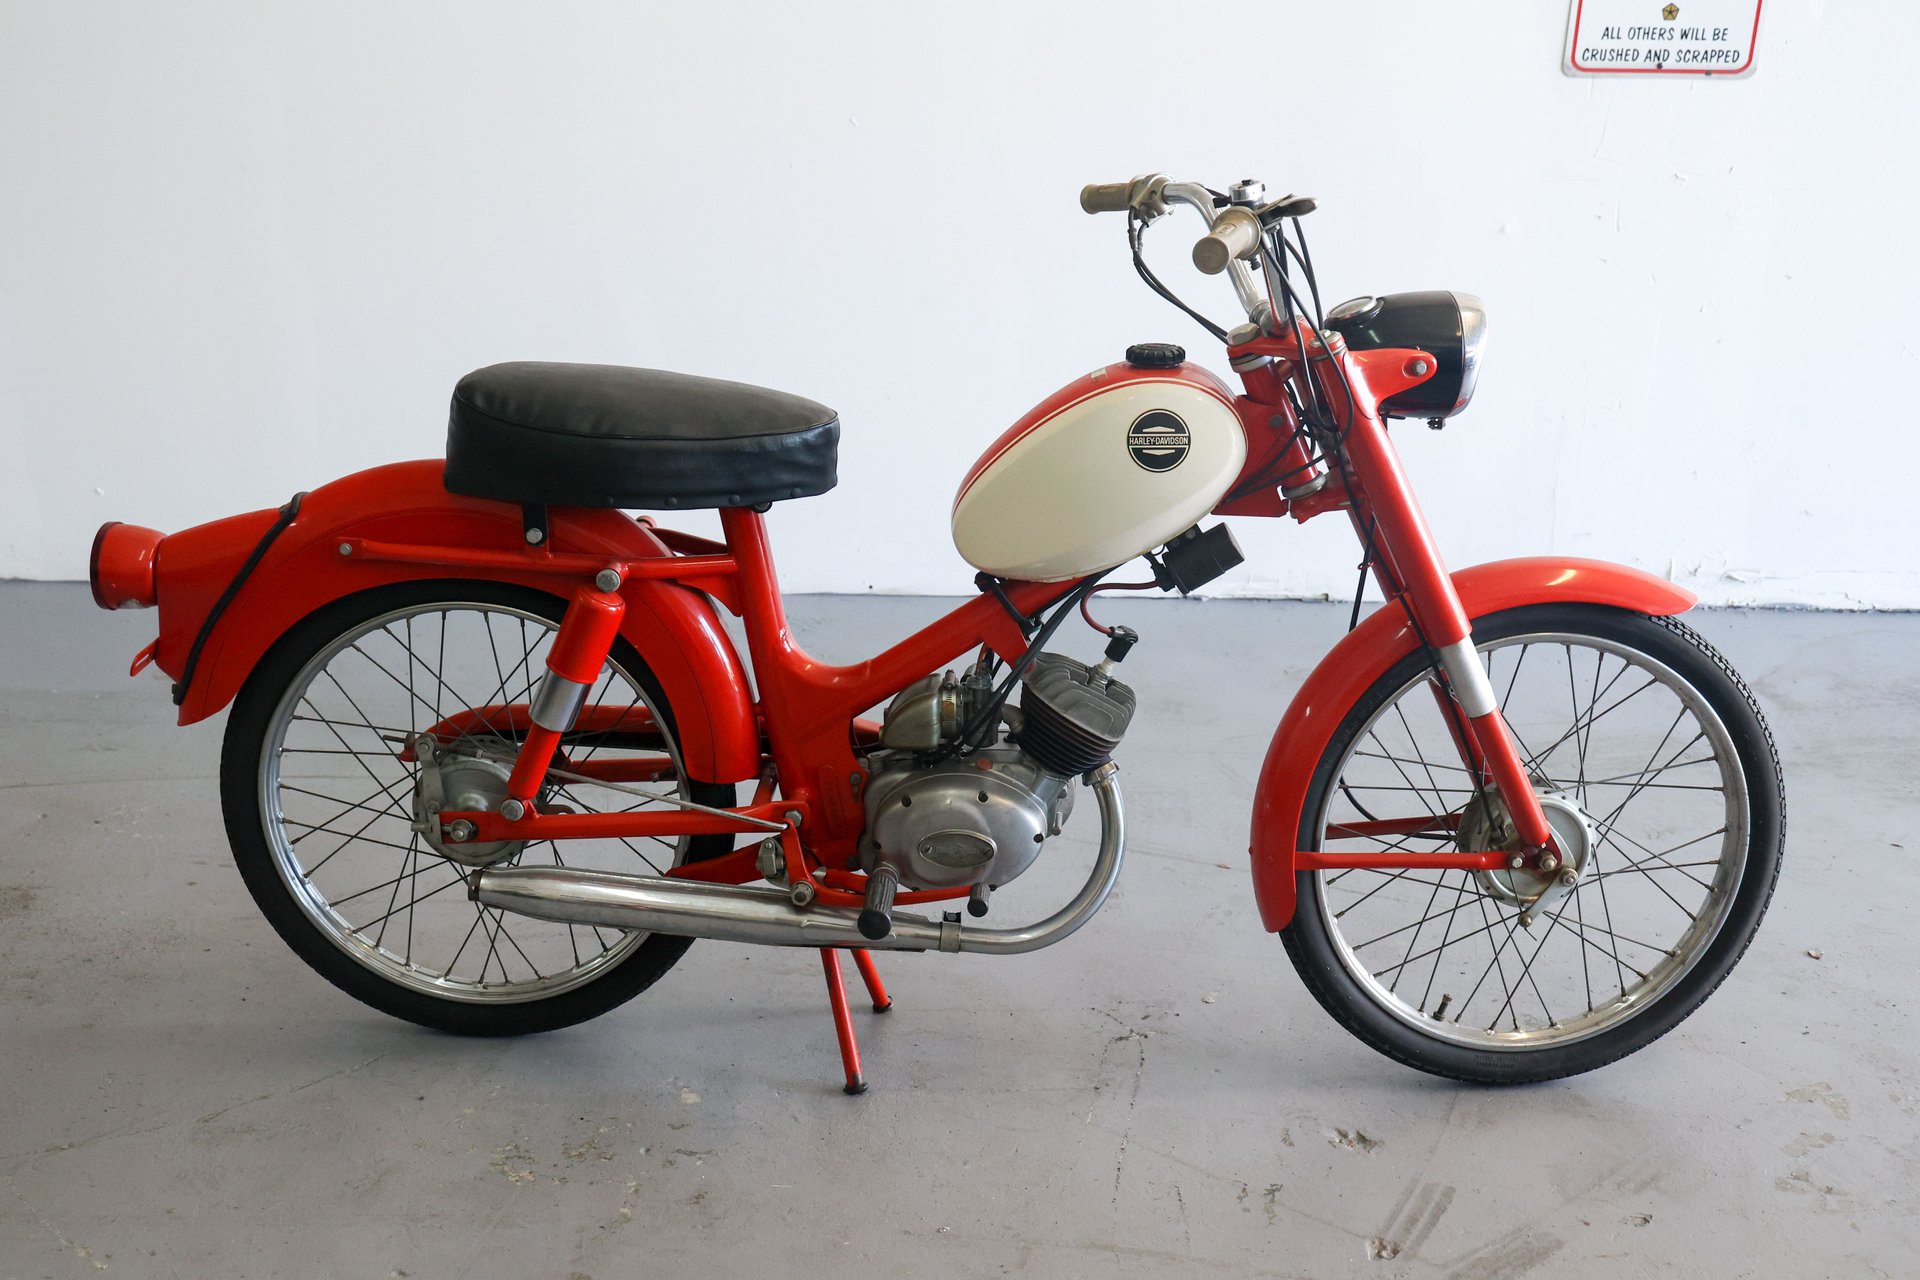 1965 Harley-Davidson M-50 | West Palm Beach | Collector Car Auctions |  Broad Arrow Auctions